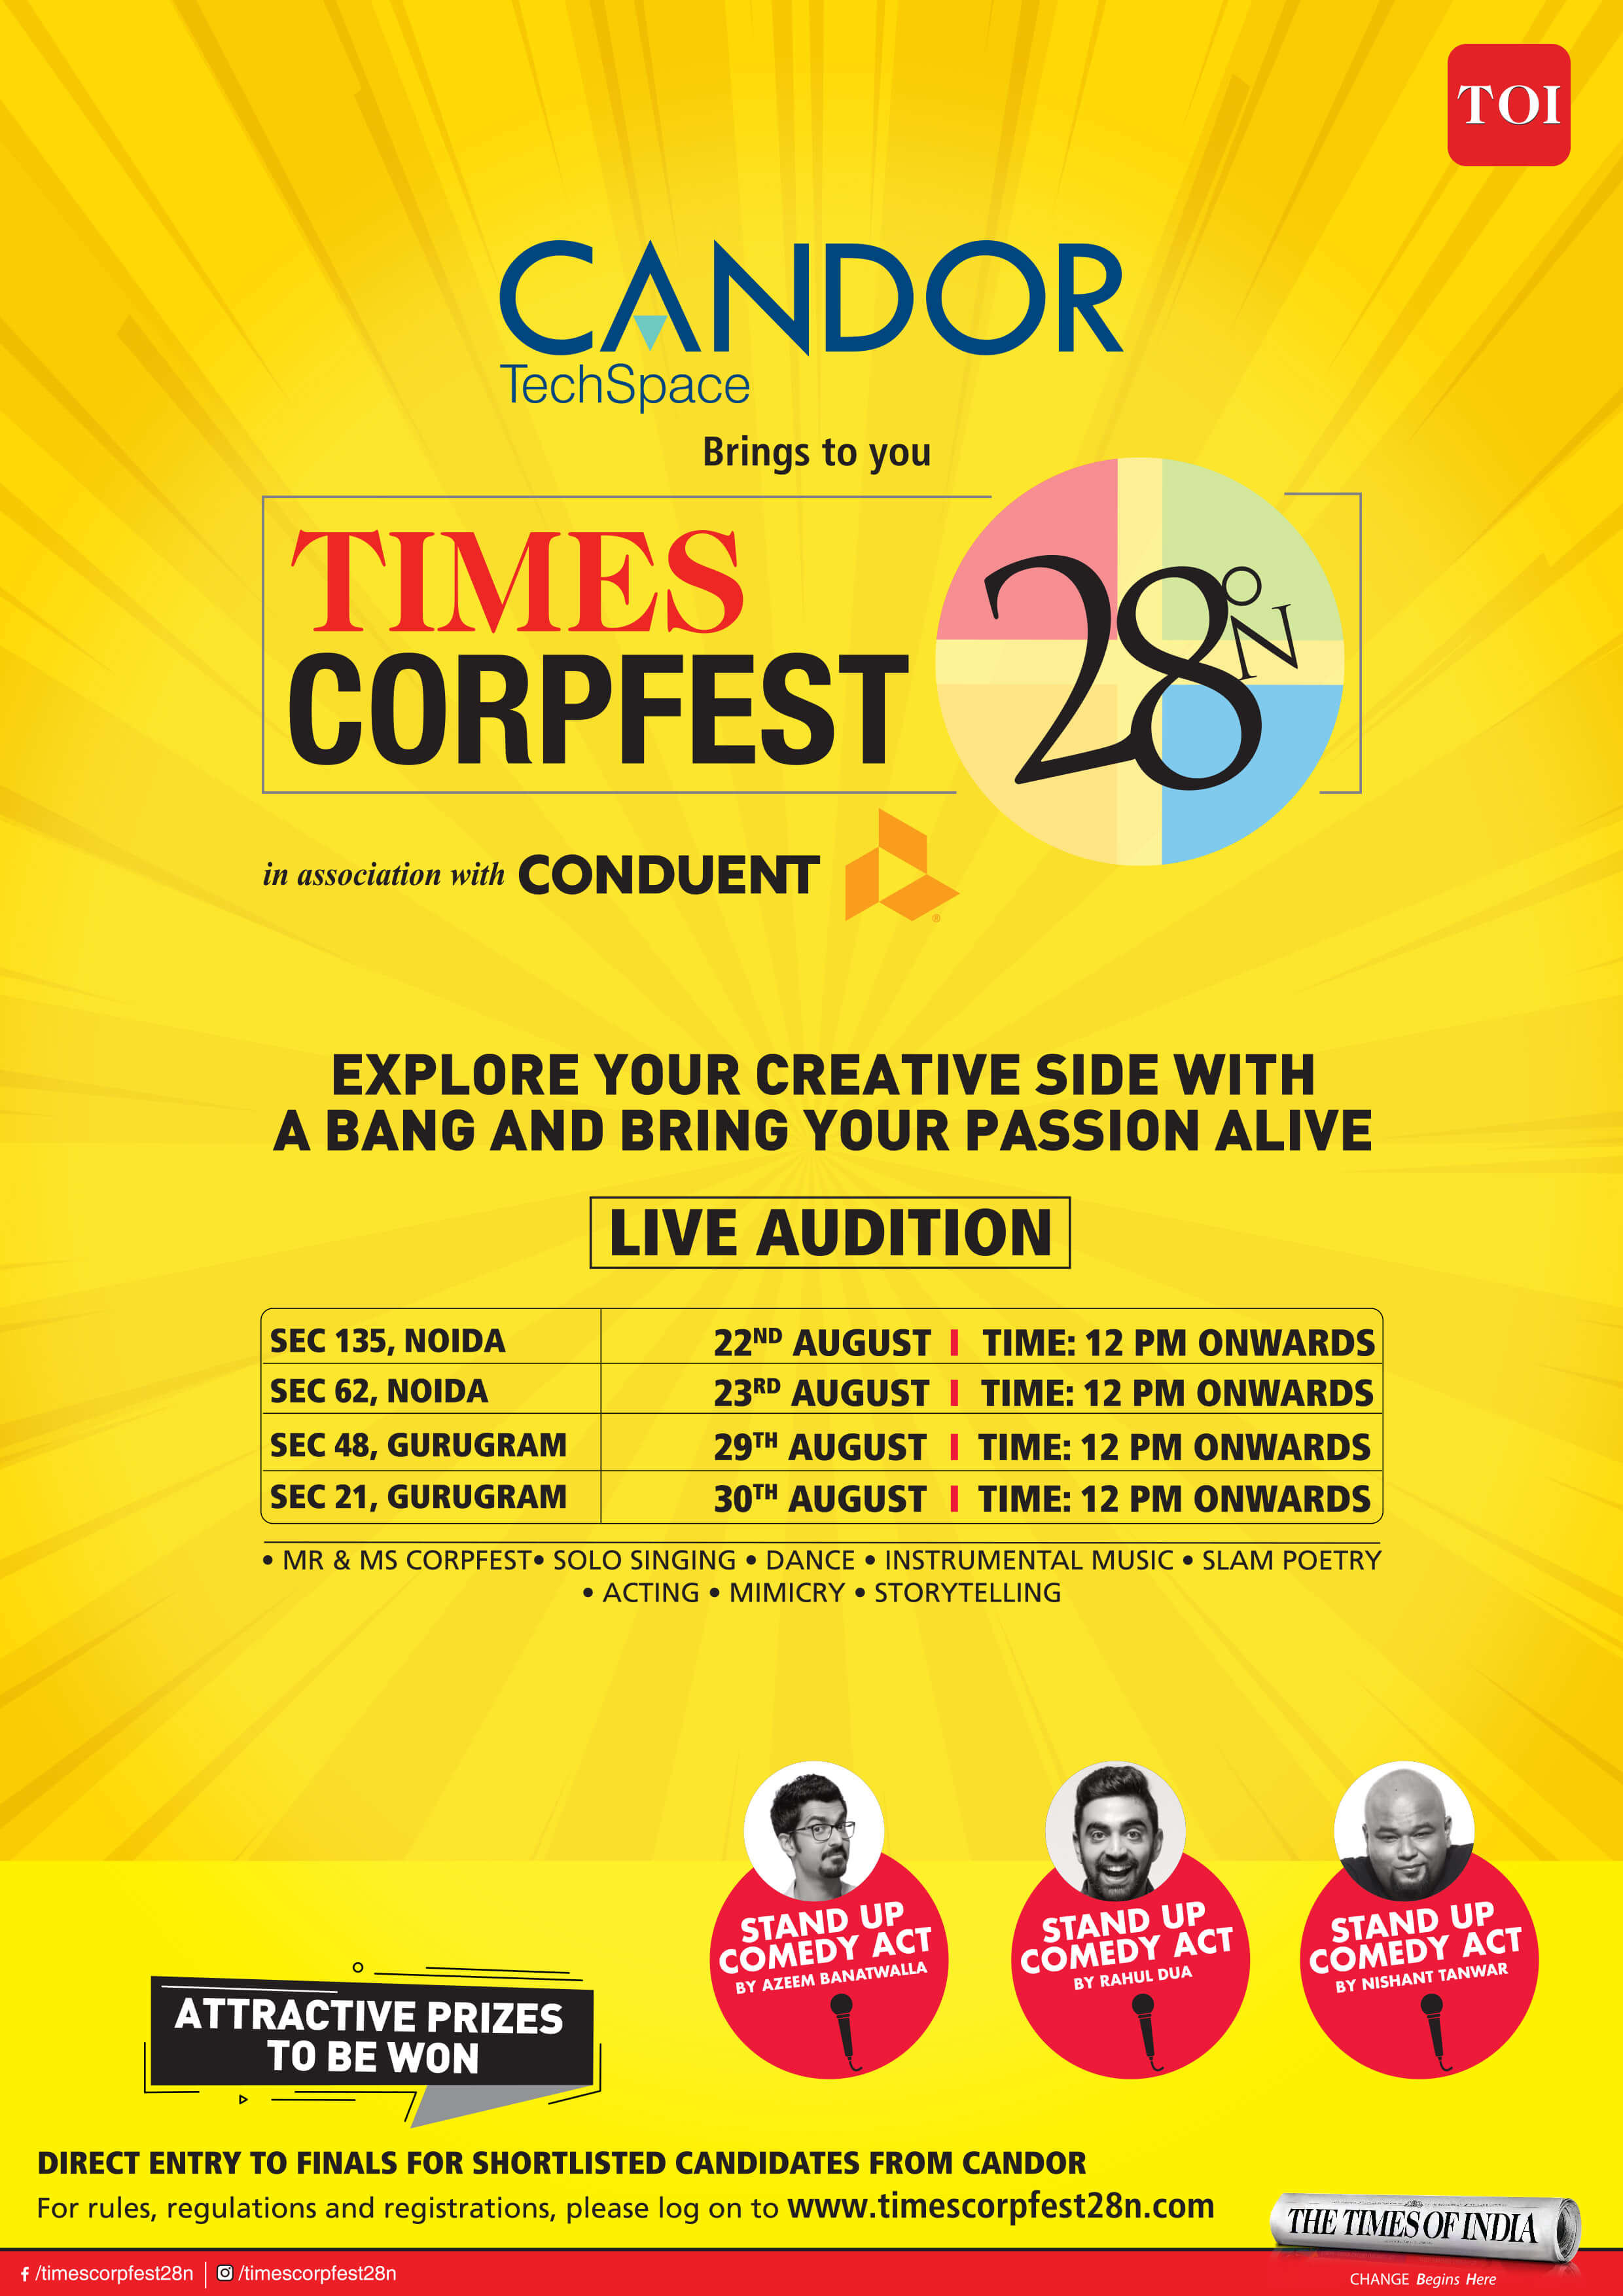 Candor TechSpace brings to you Times Corpfest from 22nd August